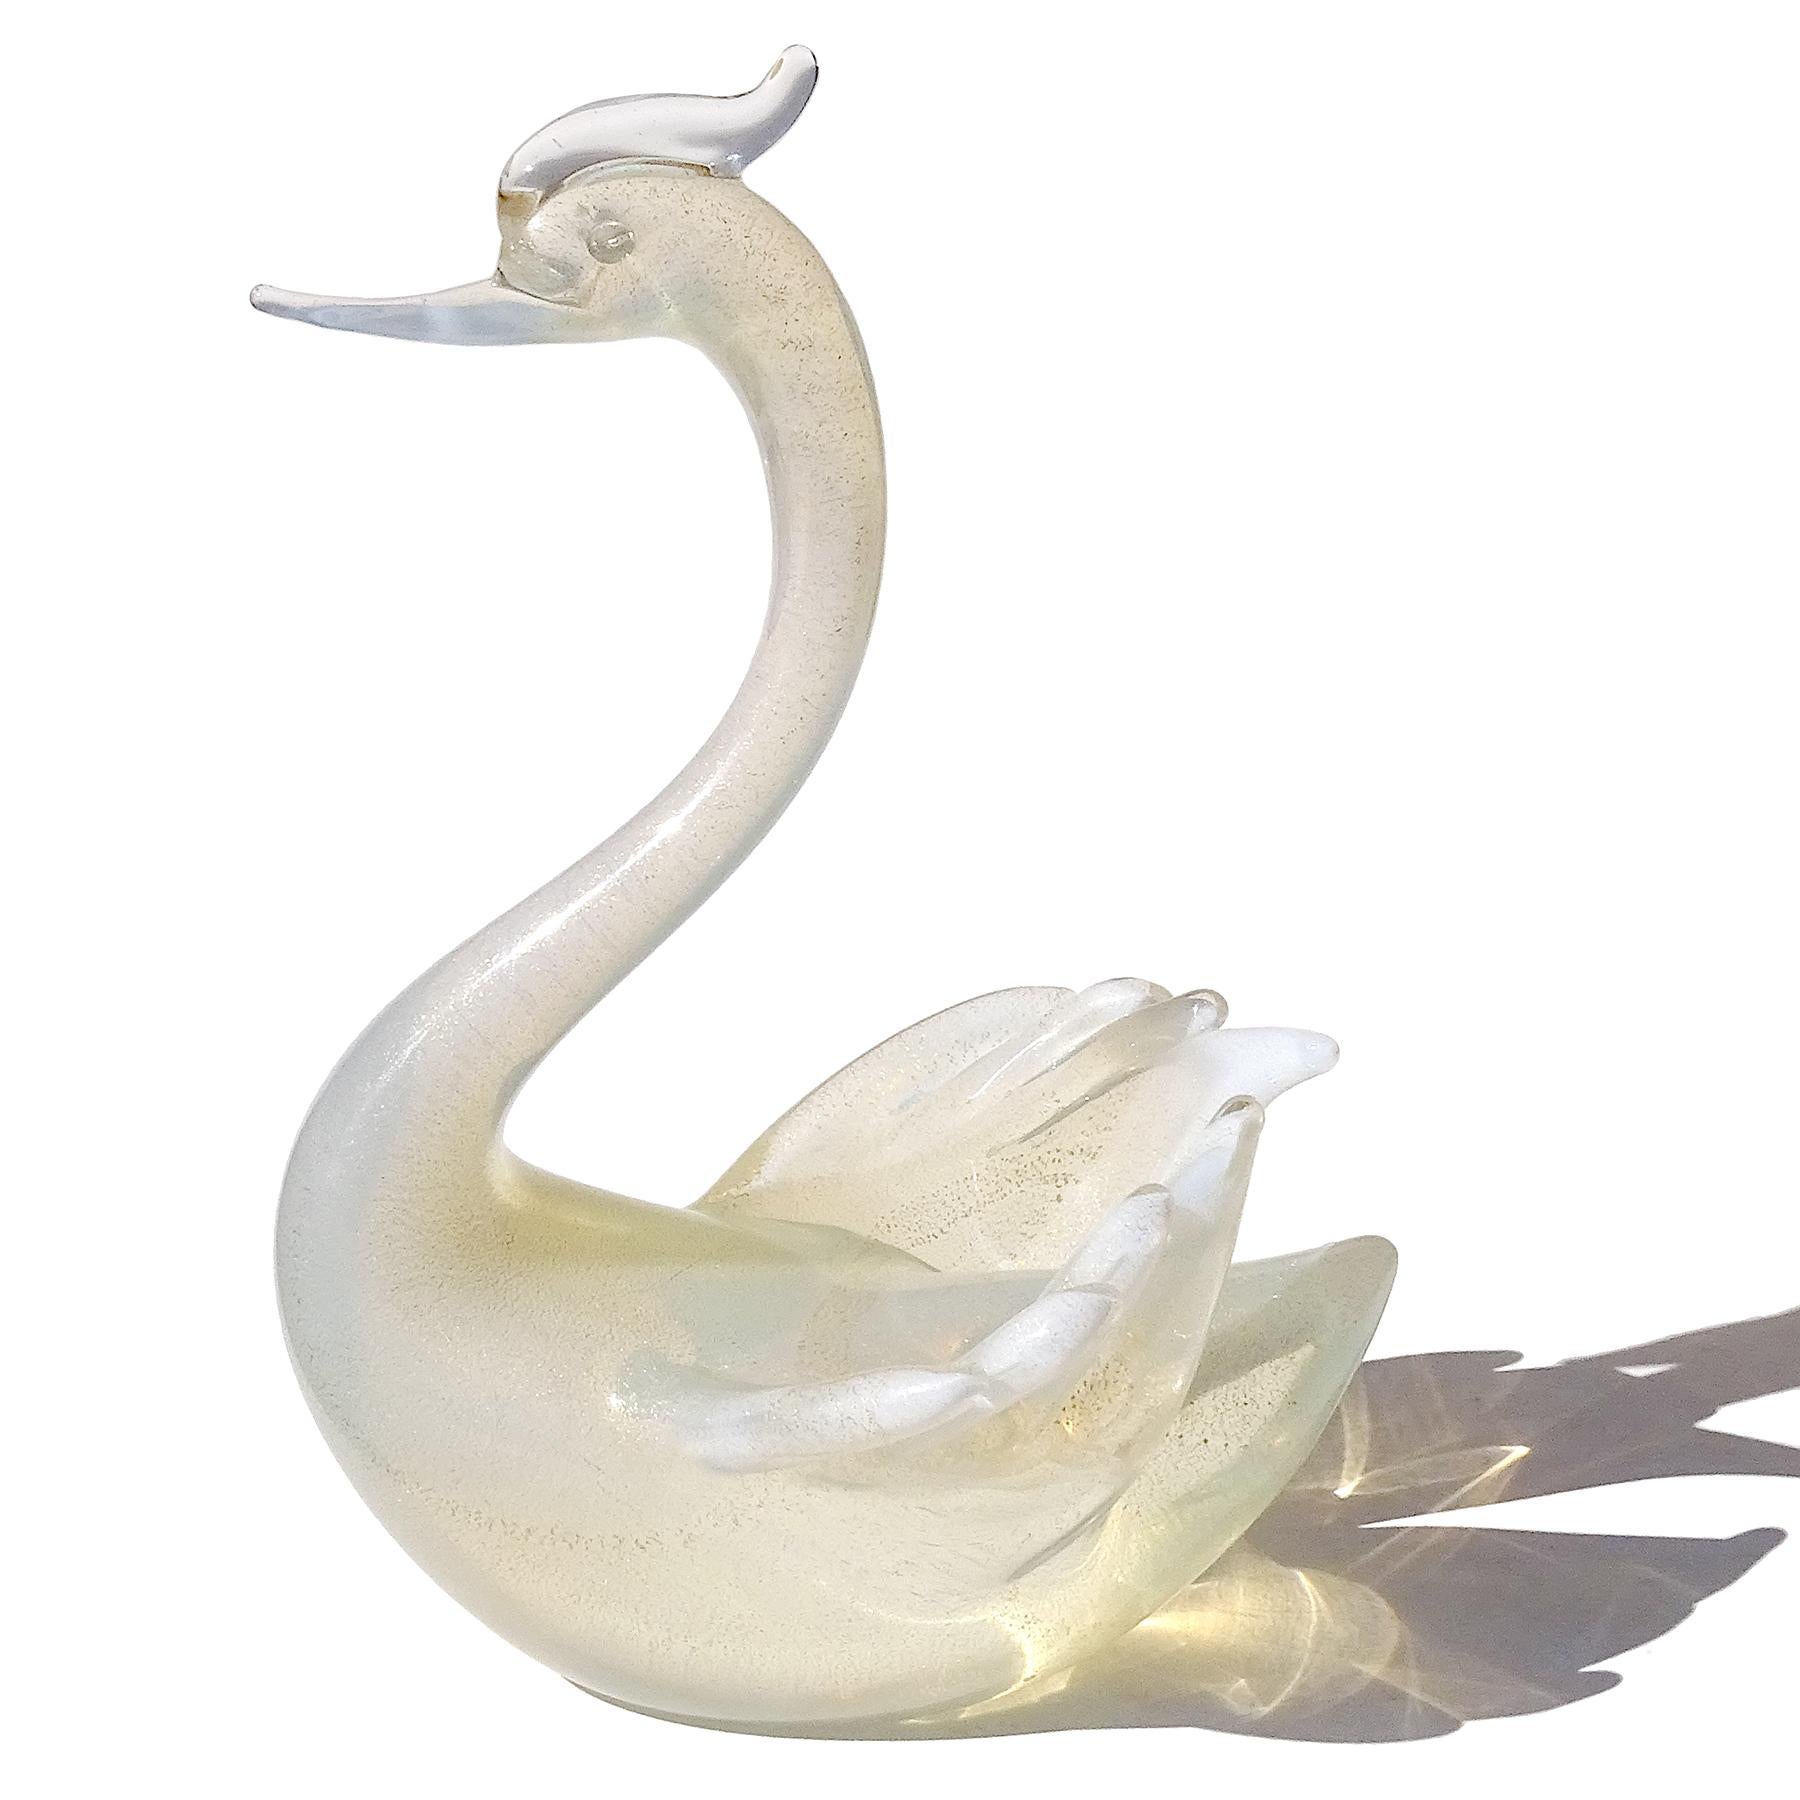 Beautiful vintage Murano hand blown white opalescent and gold flecks Italian art glass swan bird sculpture / figure. Documented to designer Archimede Seguso. Very elegant shape, with elongated neck and finely detailed wings. The bird has white